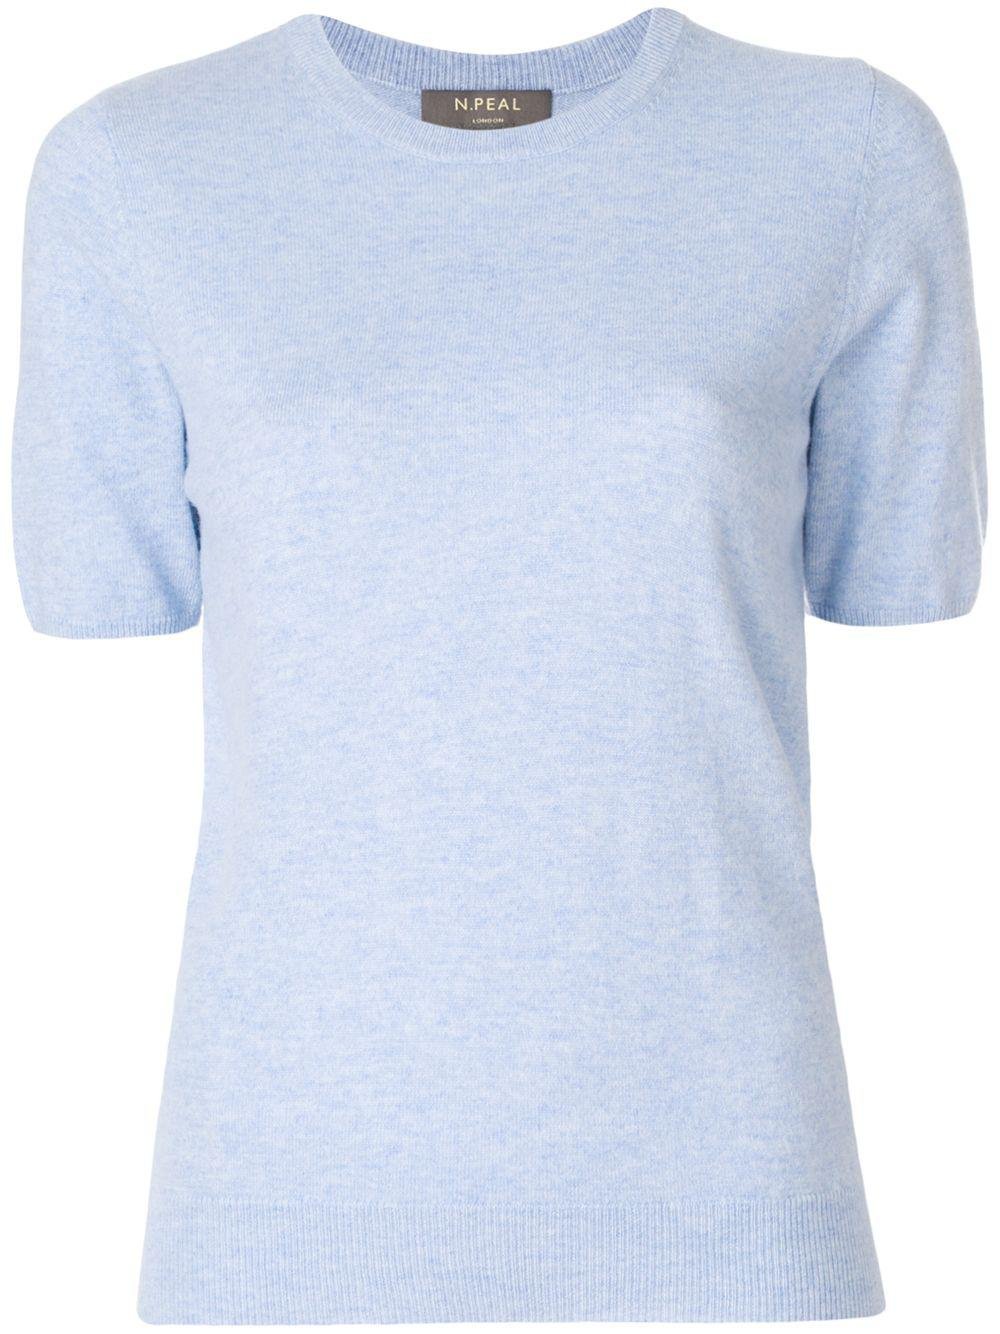 cashmere round neck T-shirt by N.PEAL